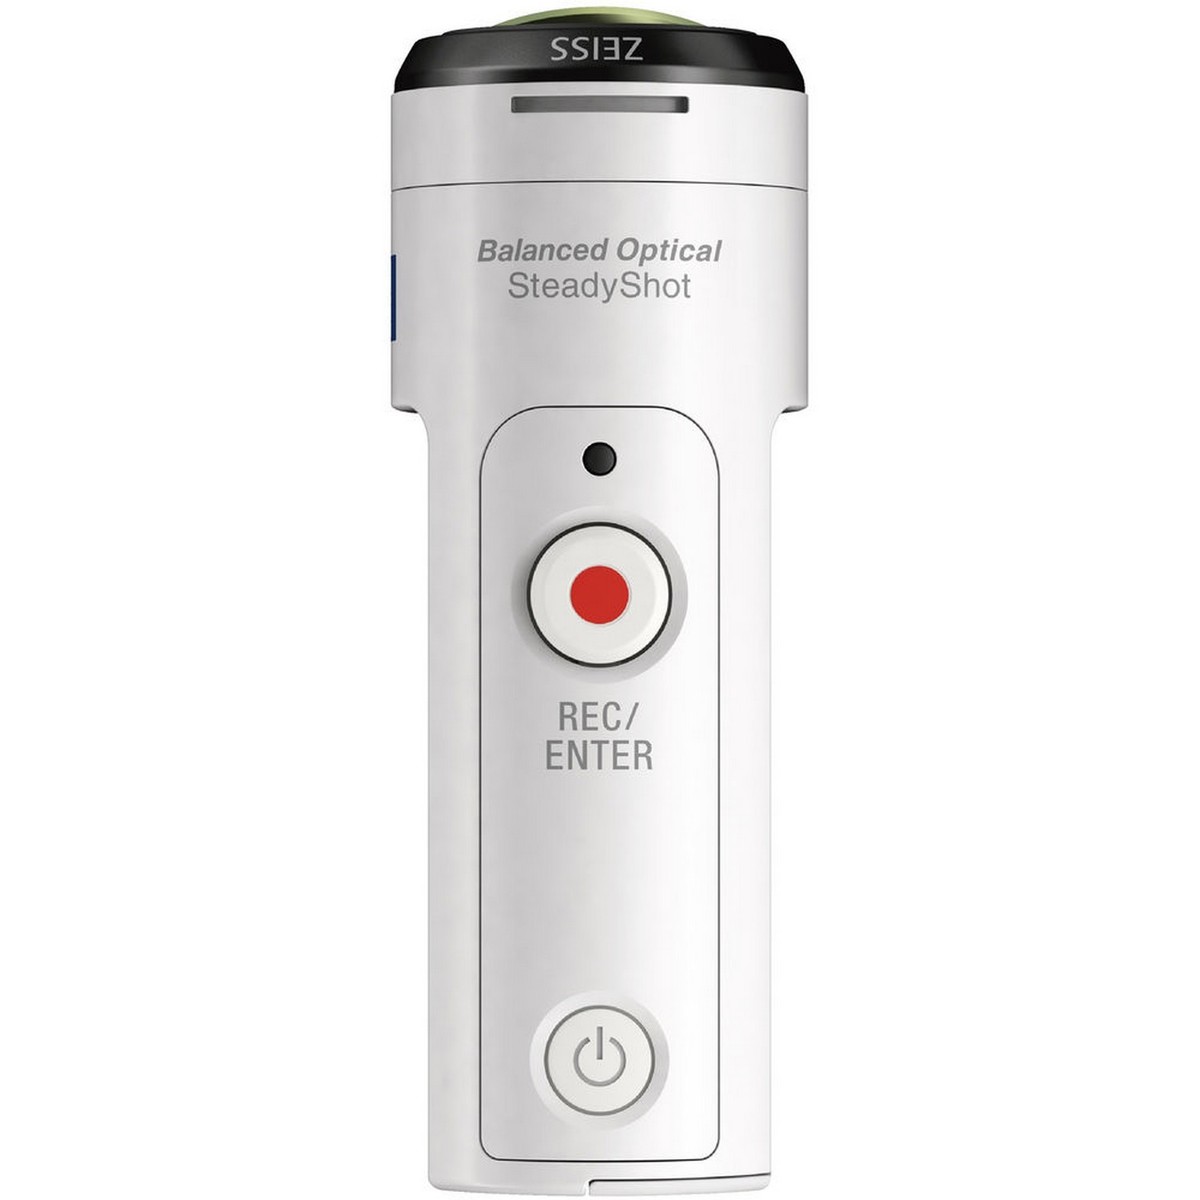 Sony Action Camera HDR-AS300R 8.2MP